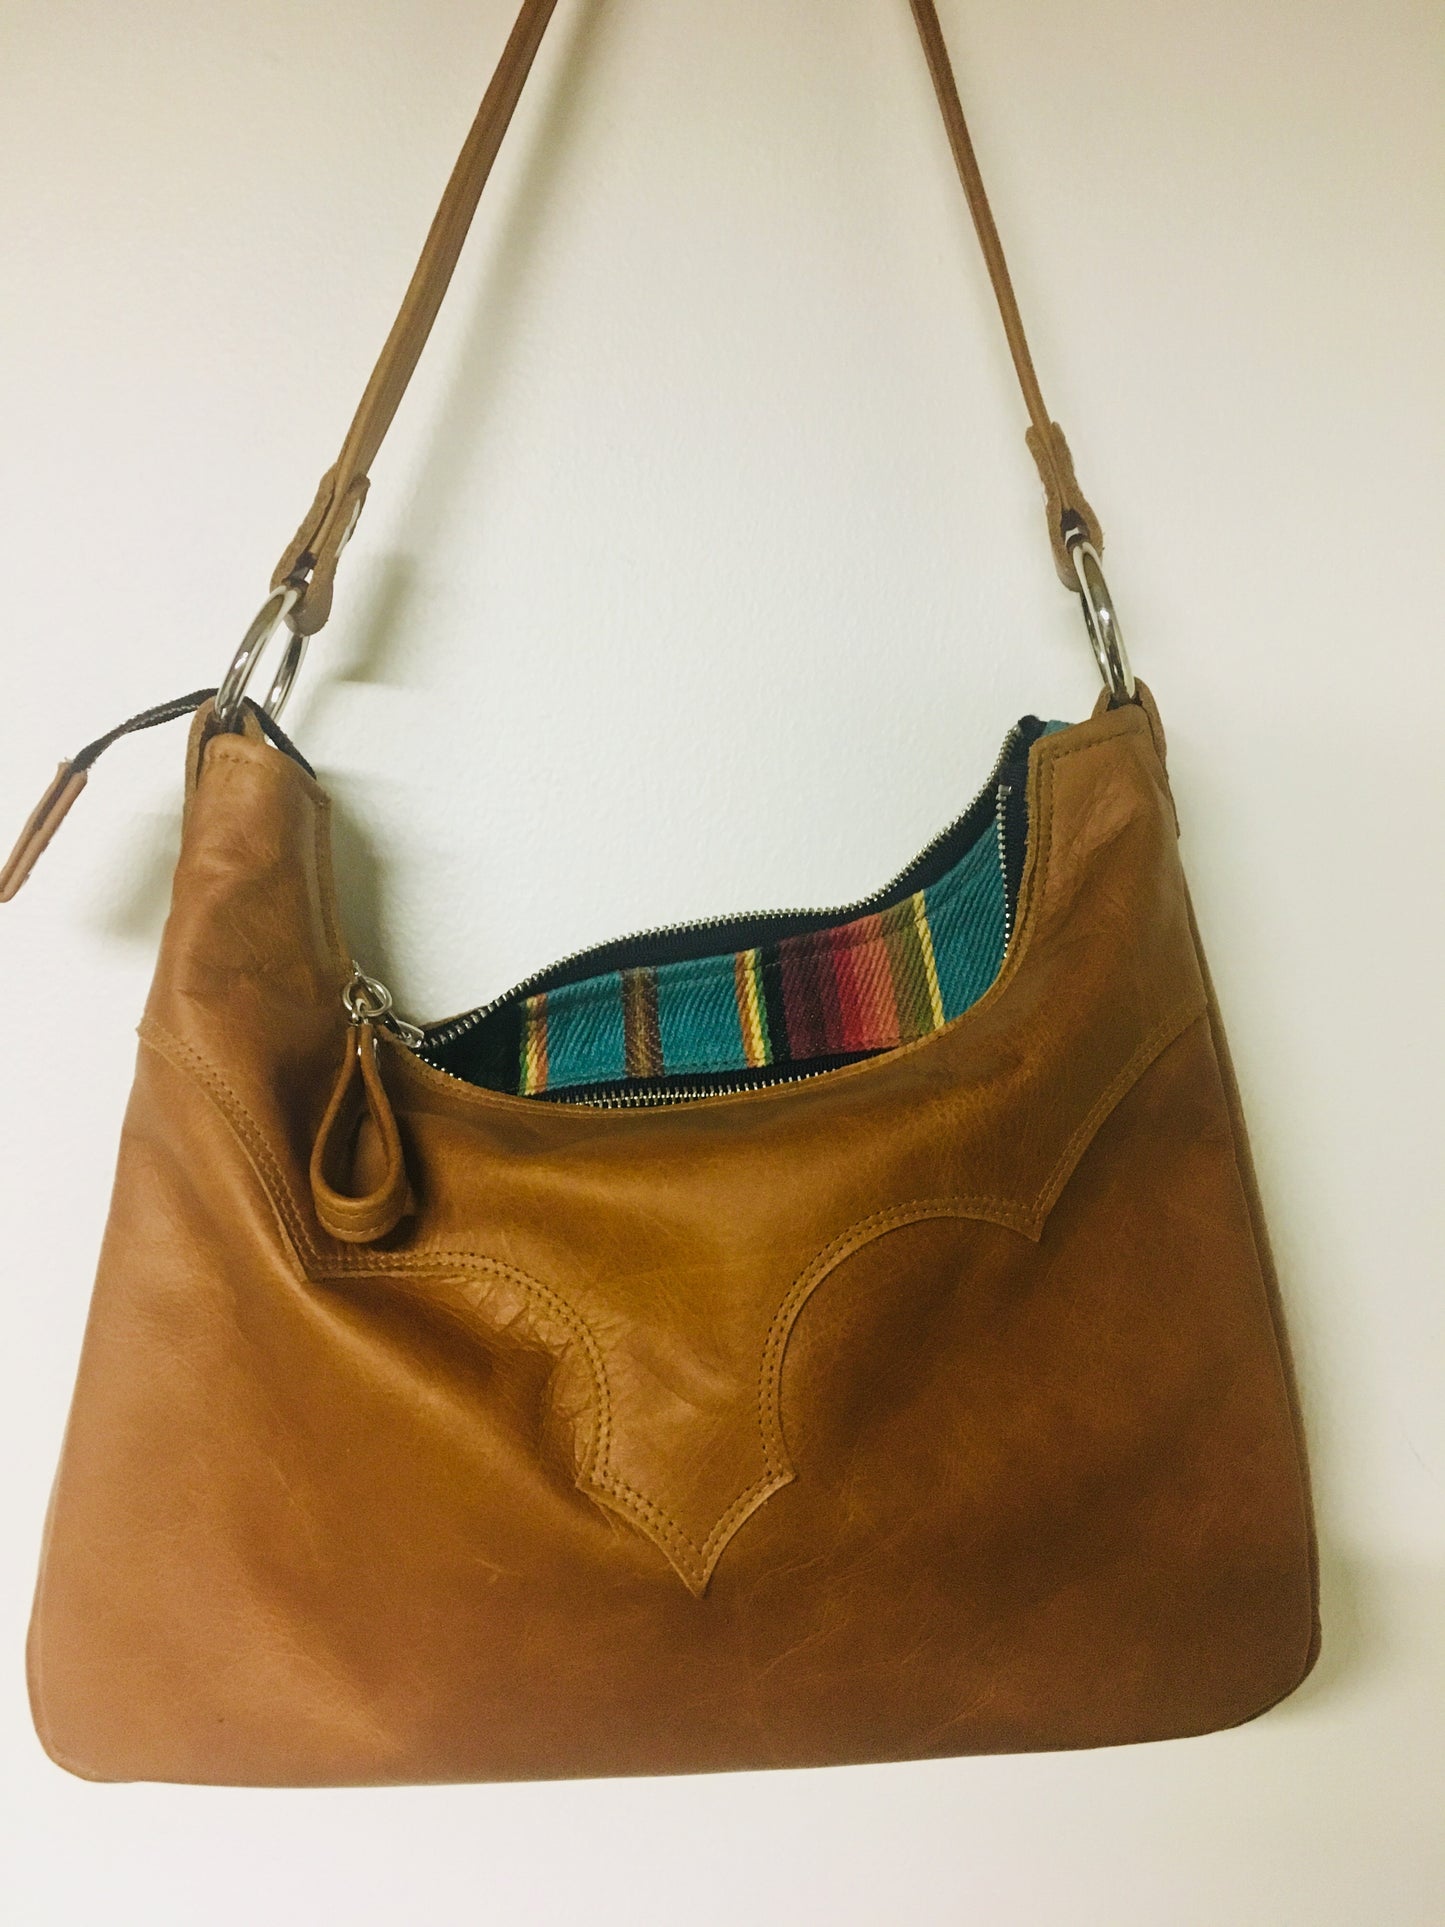 Death Valley hobo shoulder bag in Cognac leather and turquoise serapae print lining with zipper closure and vinyl pull, inside open divided pocket and one zipper pocket with 22” shoulder strap. Signature J.T.Christensen Designs Label inside.